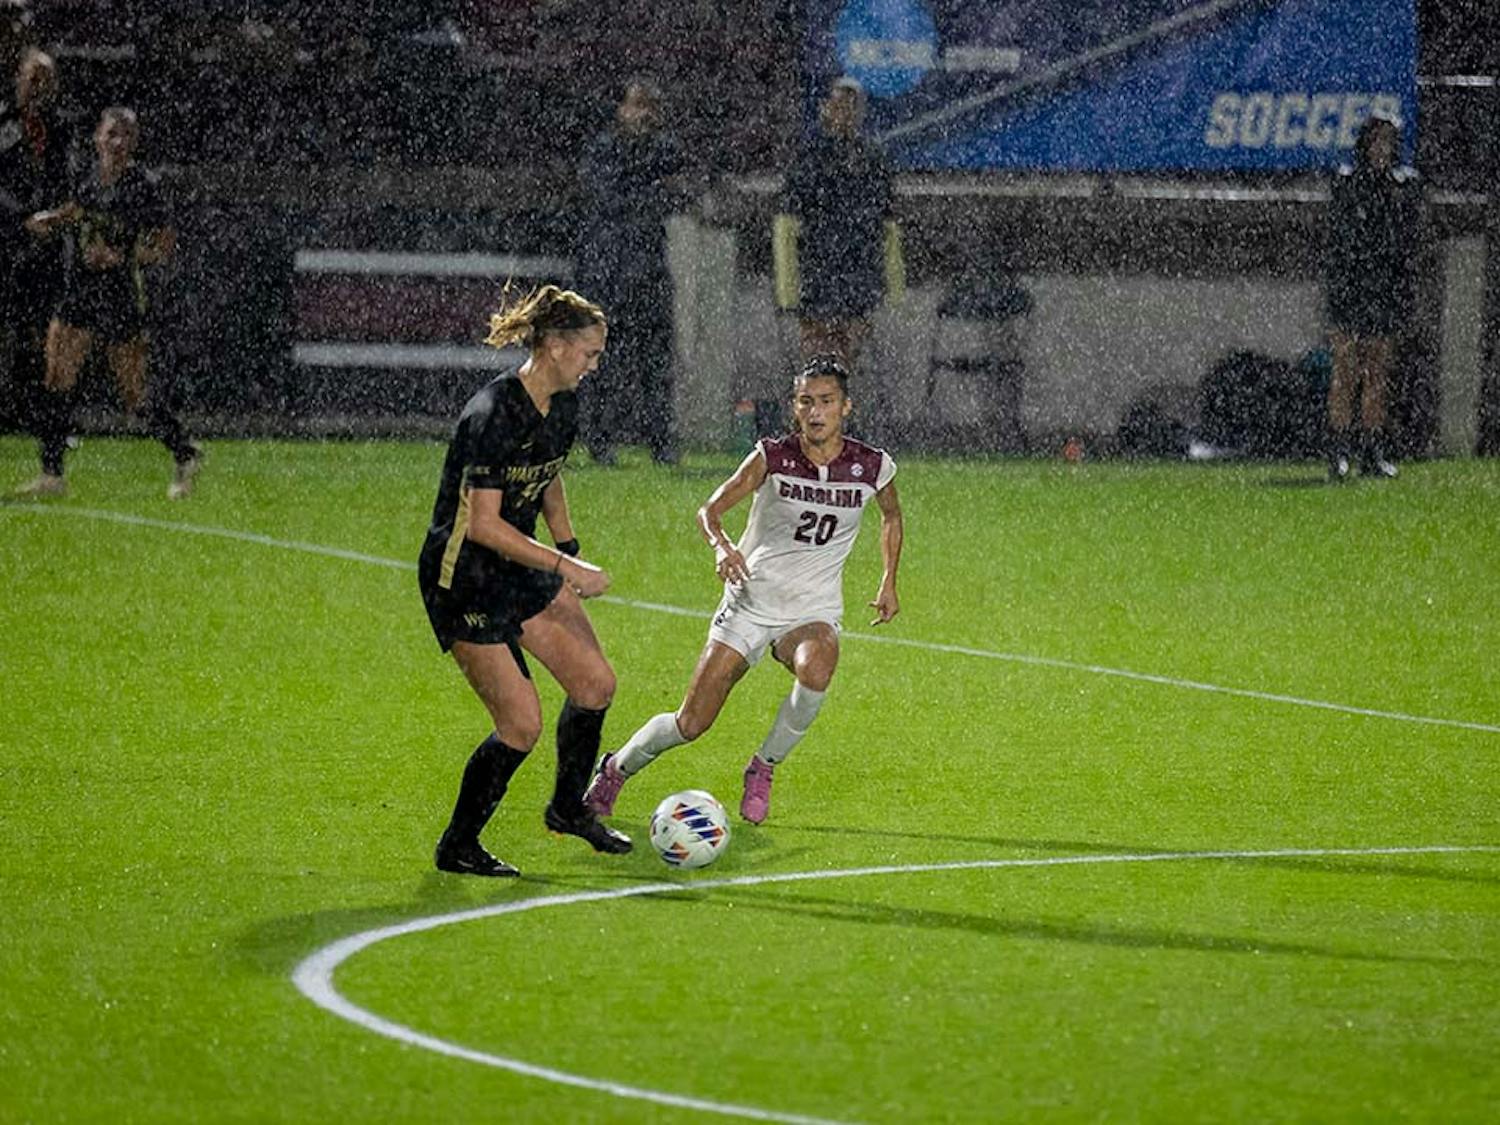 Junior forward Corinna Zullo stays close to a Wake Forest opponent in an attempt to take control of the ball. Even with all the rain, many fans stayed in the crowd to watch the Gamecocks beat Wake Forest at Stone Stadium on Nov. 11, 2022.